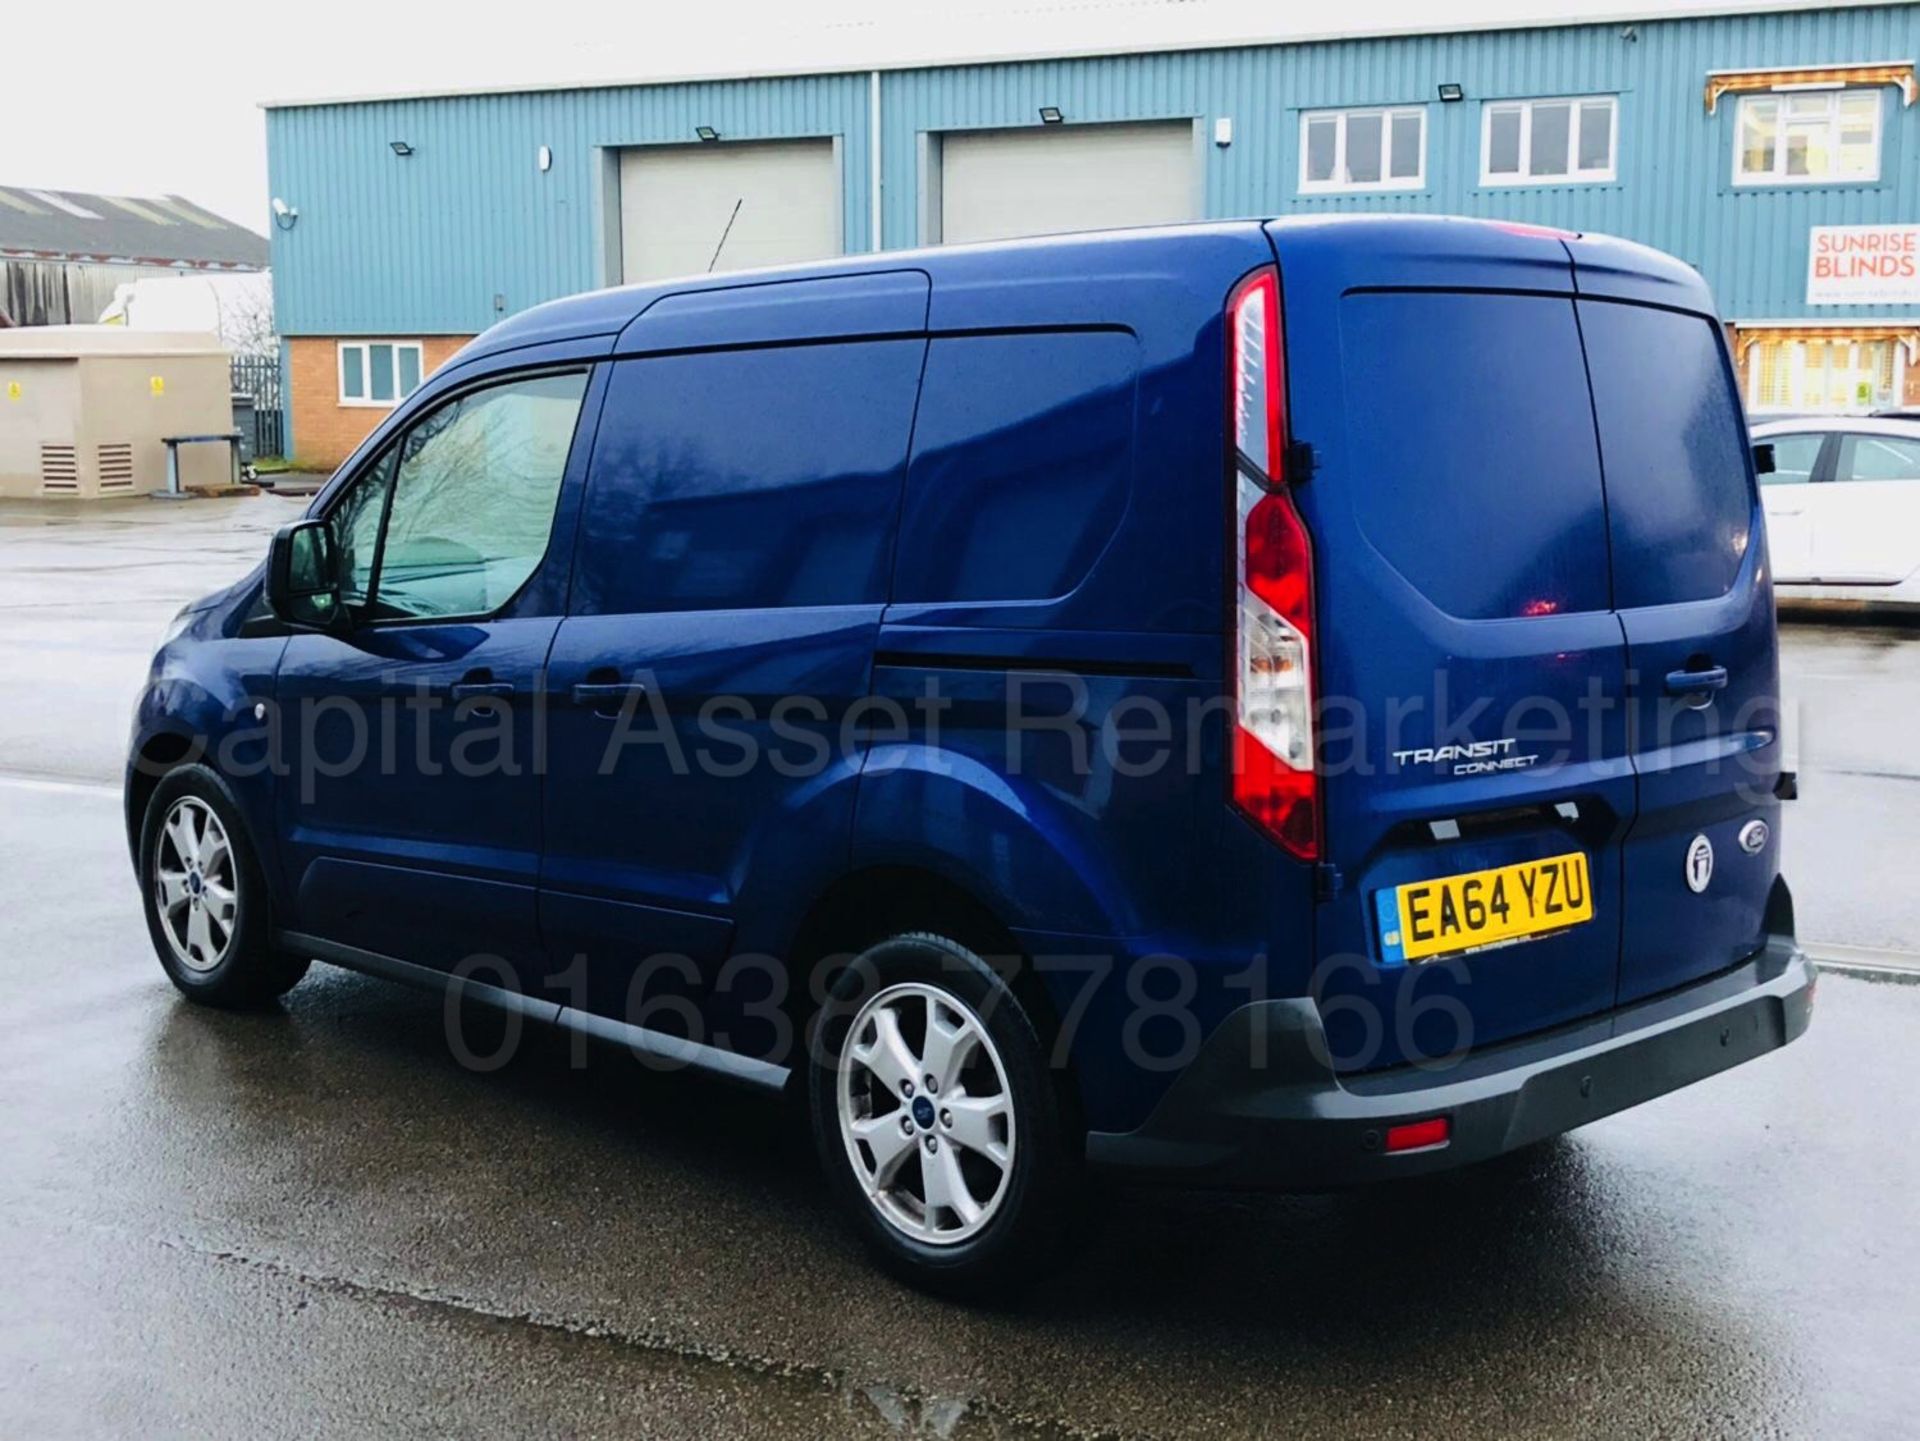 FORD TRANSIT CONNECT 'LIMITED' (2015 - FACELIFT MODEL) '1.6 TDCI - 115 PS - 6 SPEED' *A/C* (1 OWNER) - Image 3 of 28